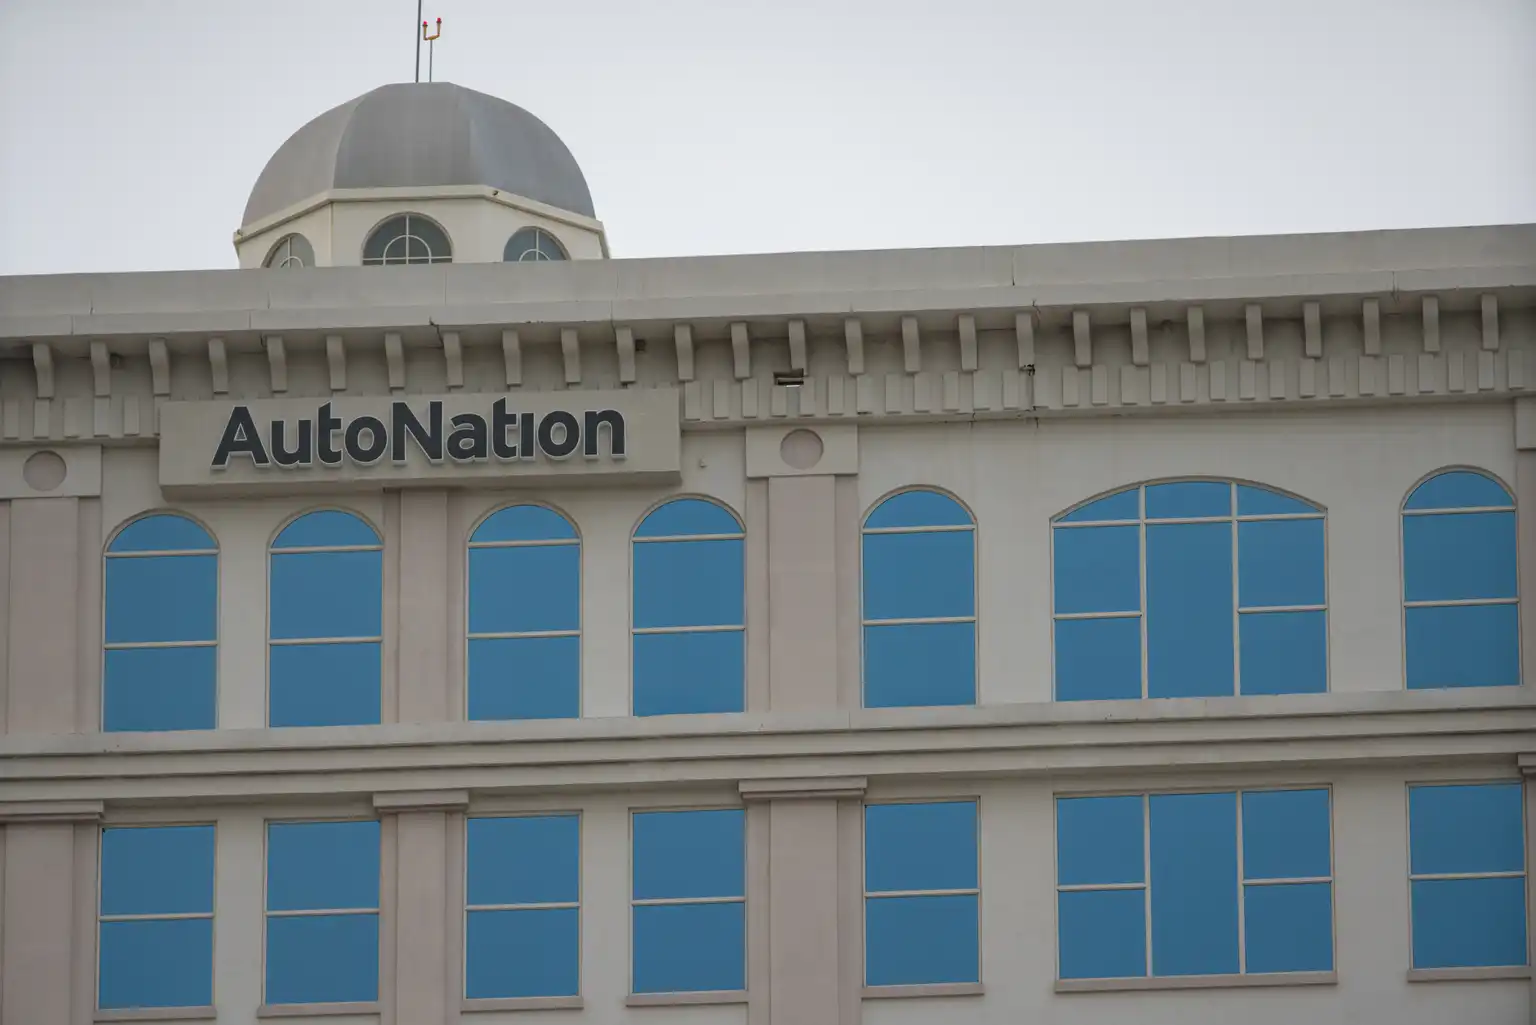 AutoNation: Strong Q1 Results With Aggressive Buybacks Continuing - Seeking Alpha